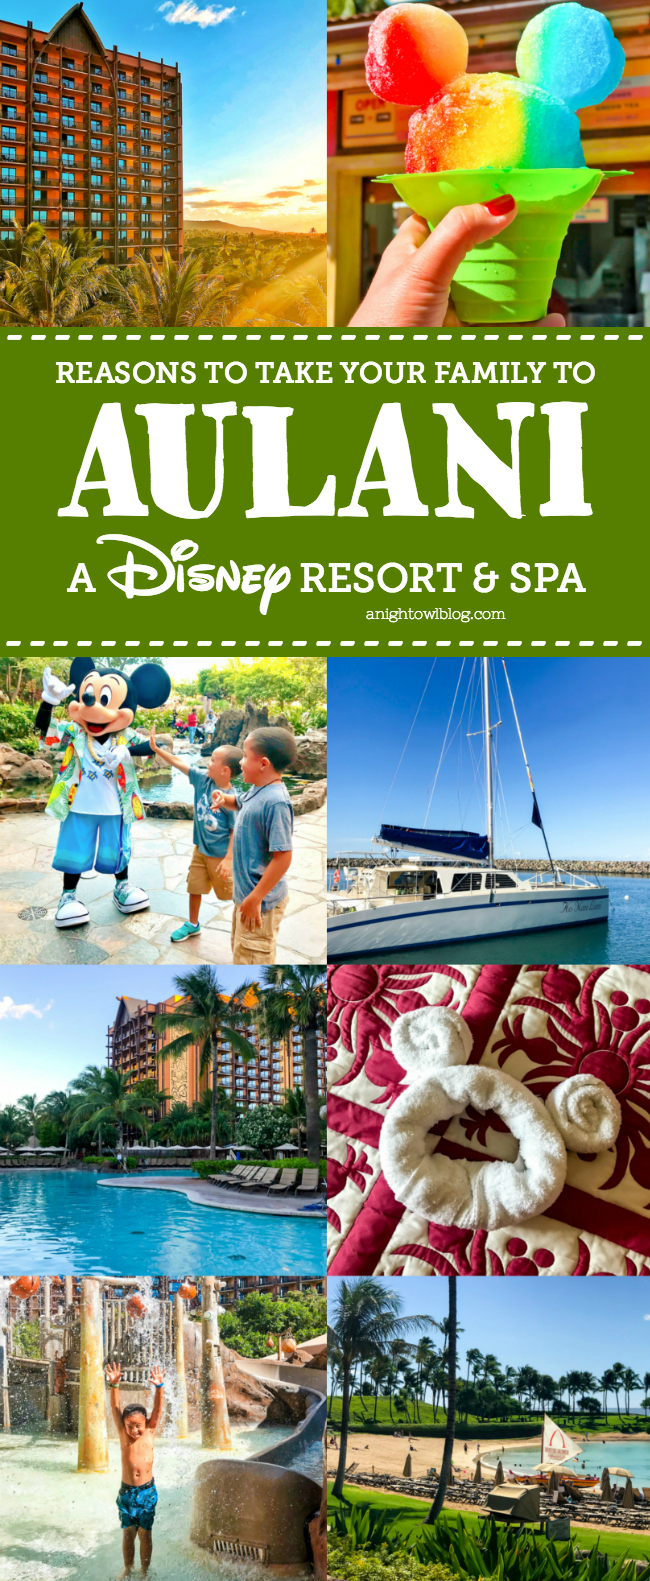 From Dining and Accommodations to The Disney Difference, discover 10 Reasons to Take Your Family to Aulani - A Disney Resort & Spa.